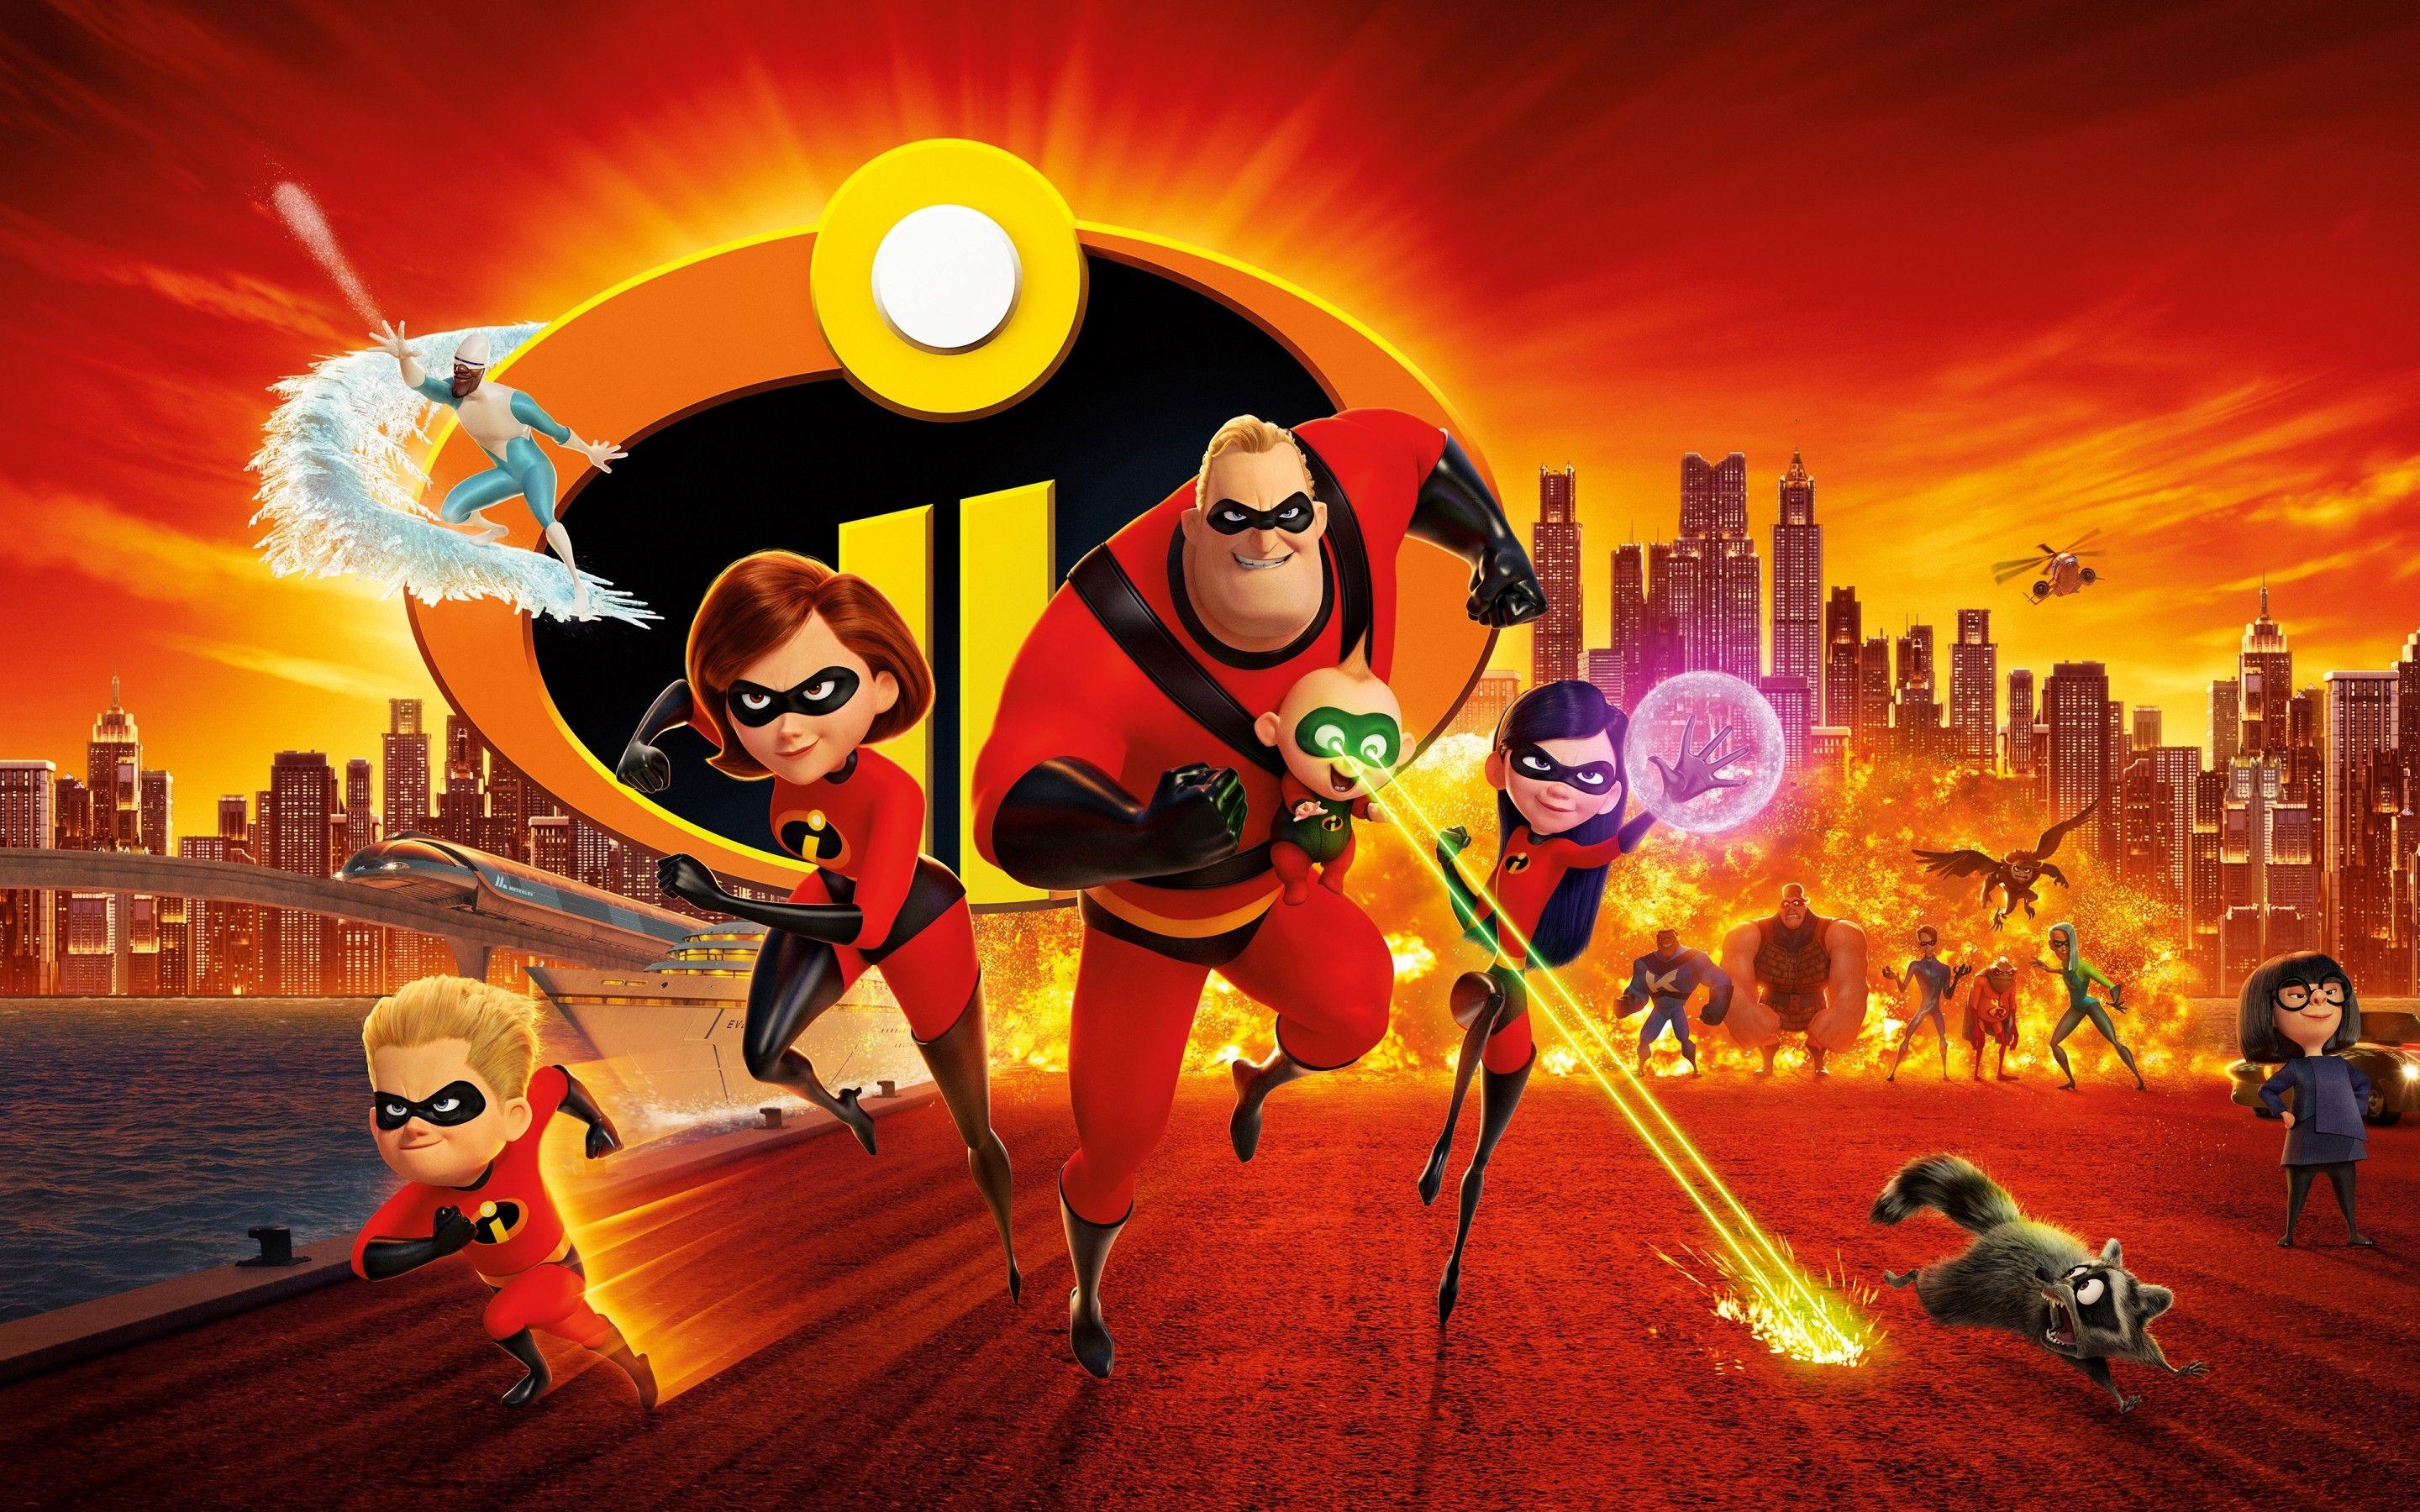 Download 2880x1800 Incredibles Animation Wallpaper for MacBook